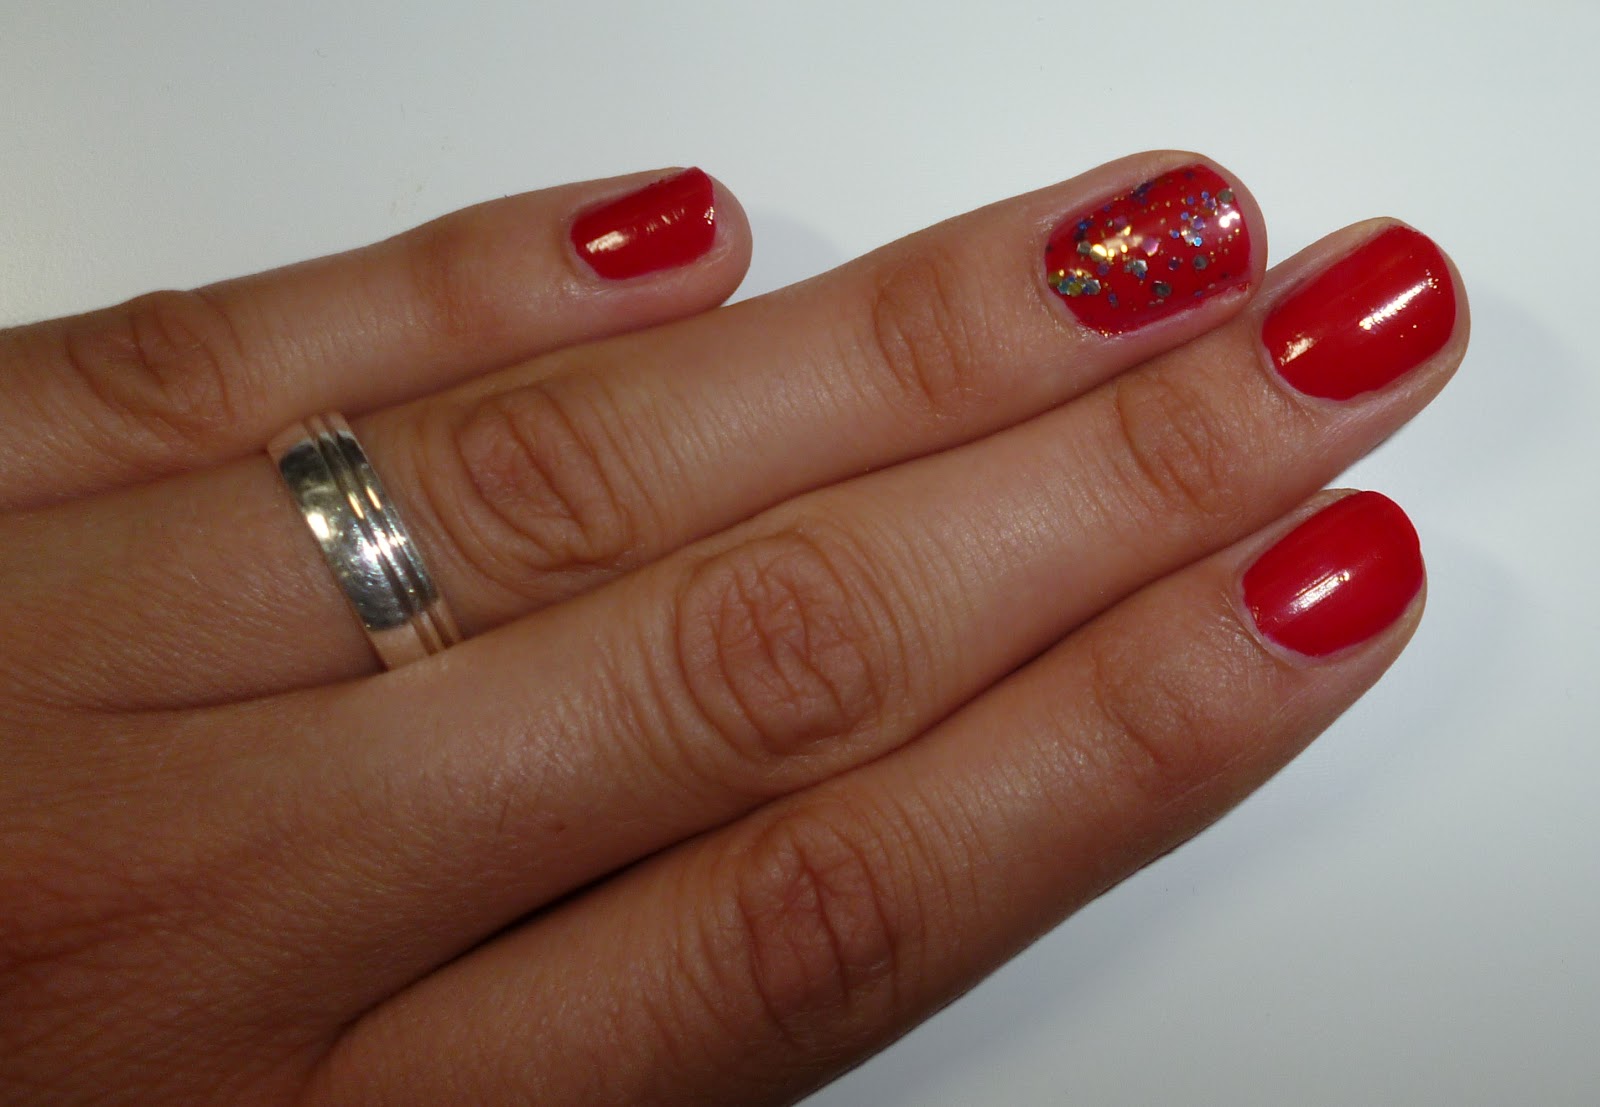 2. Essie Really Red - wide 6